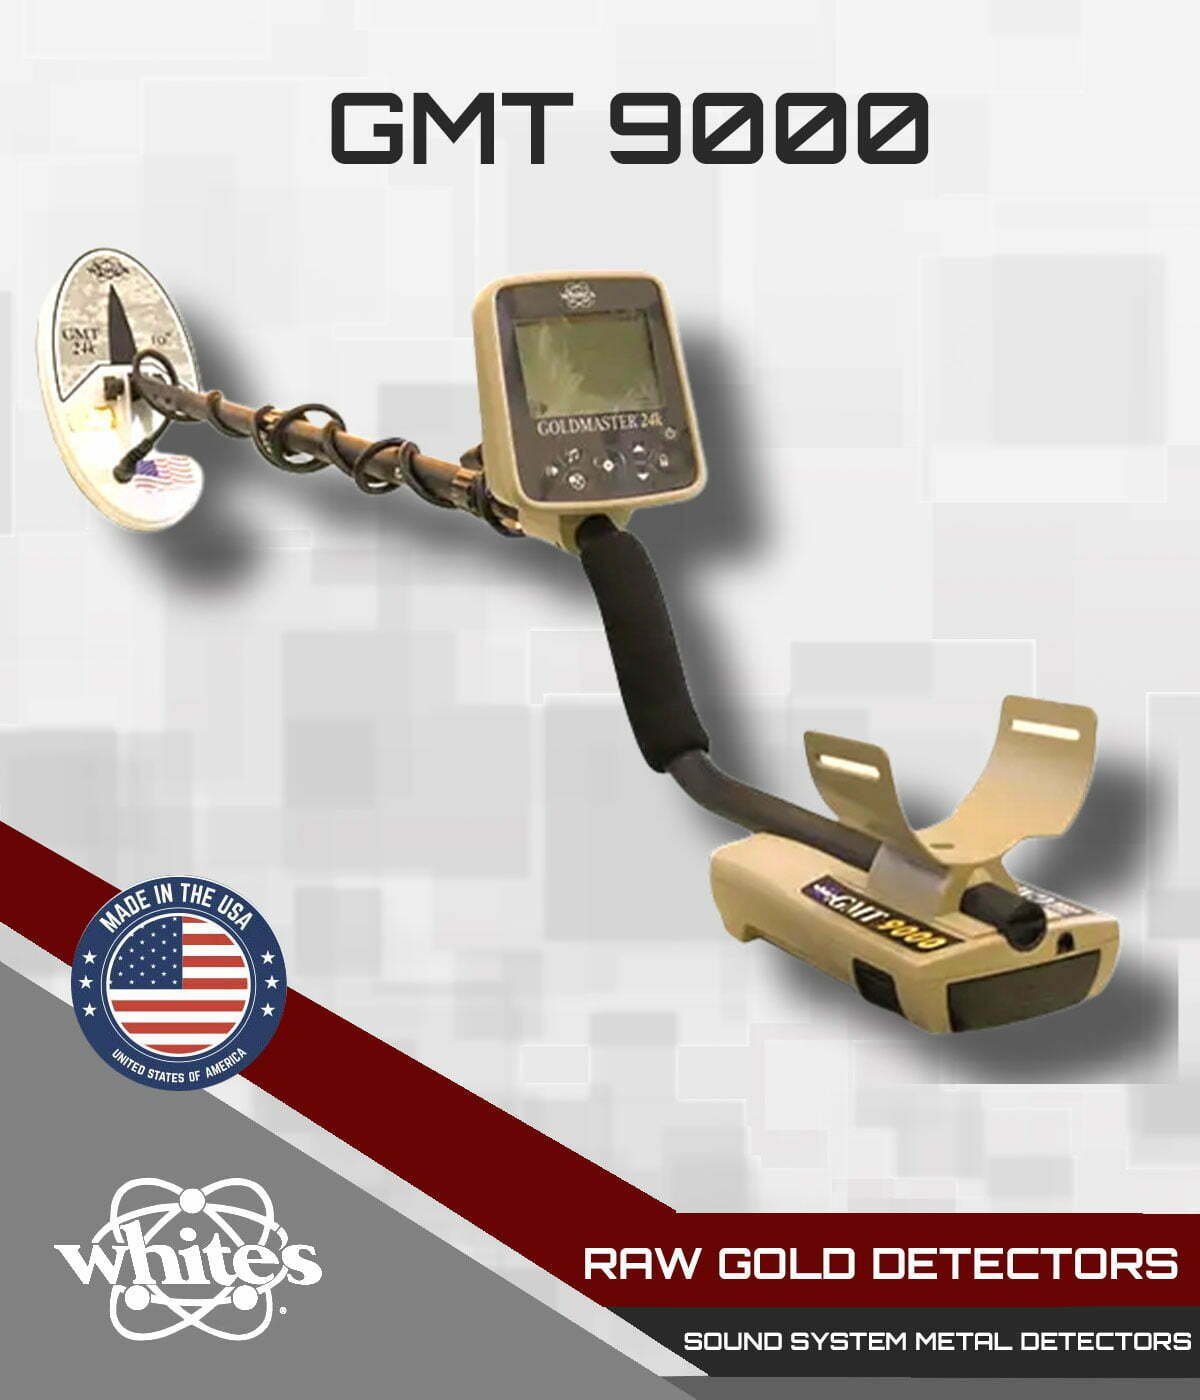 GMT 9000 gold ore detector